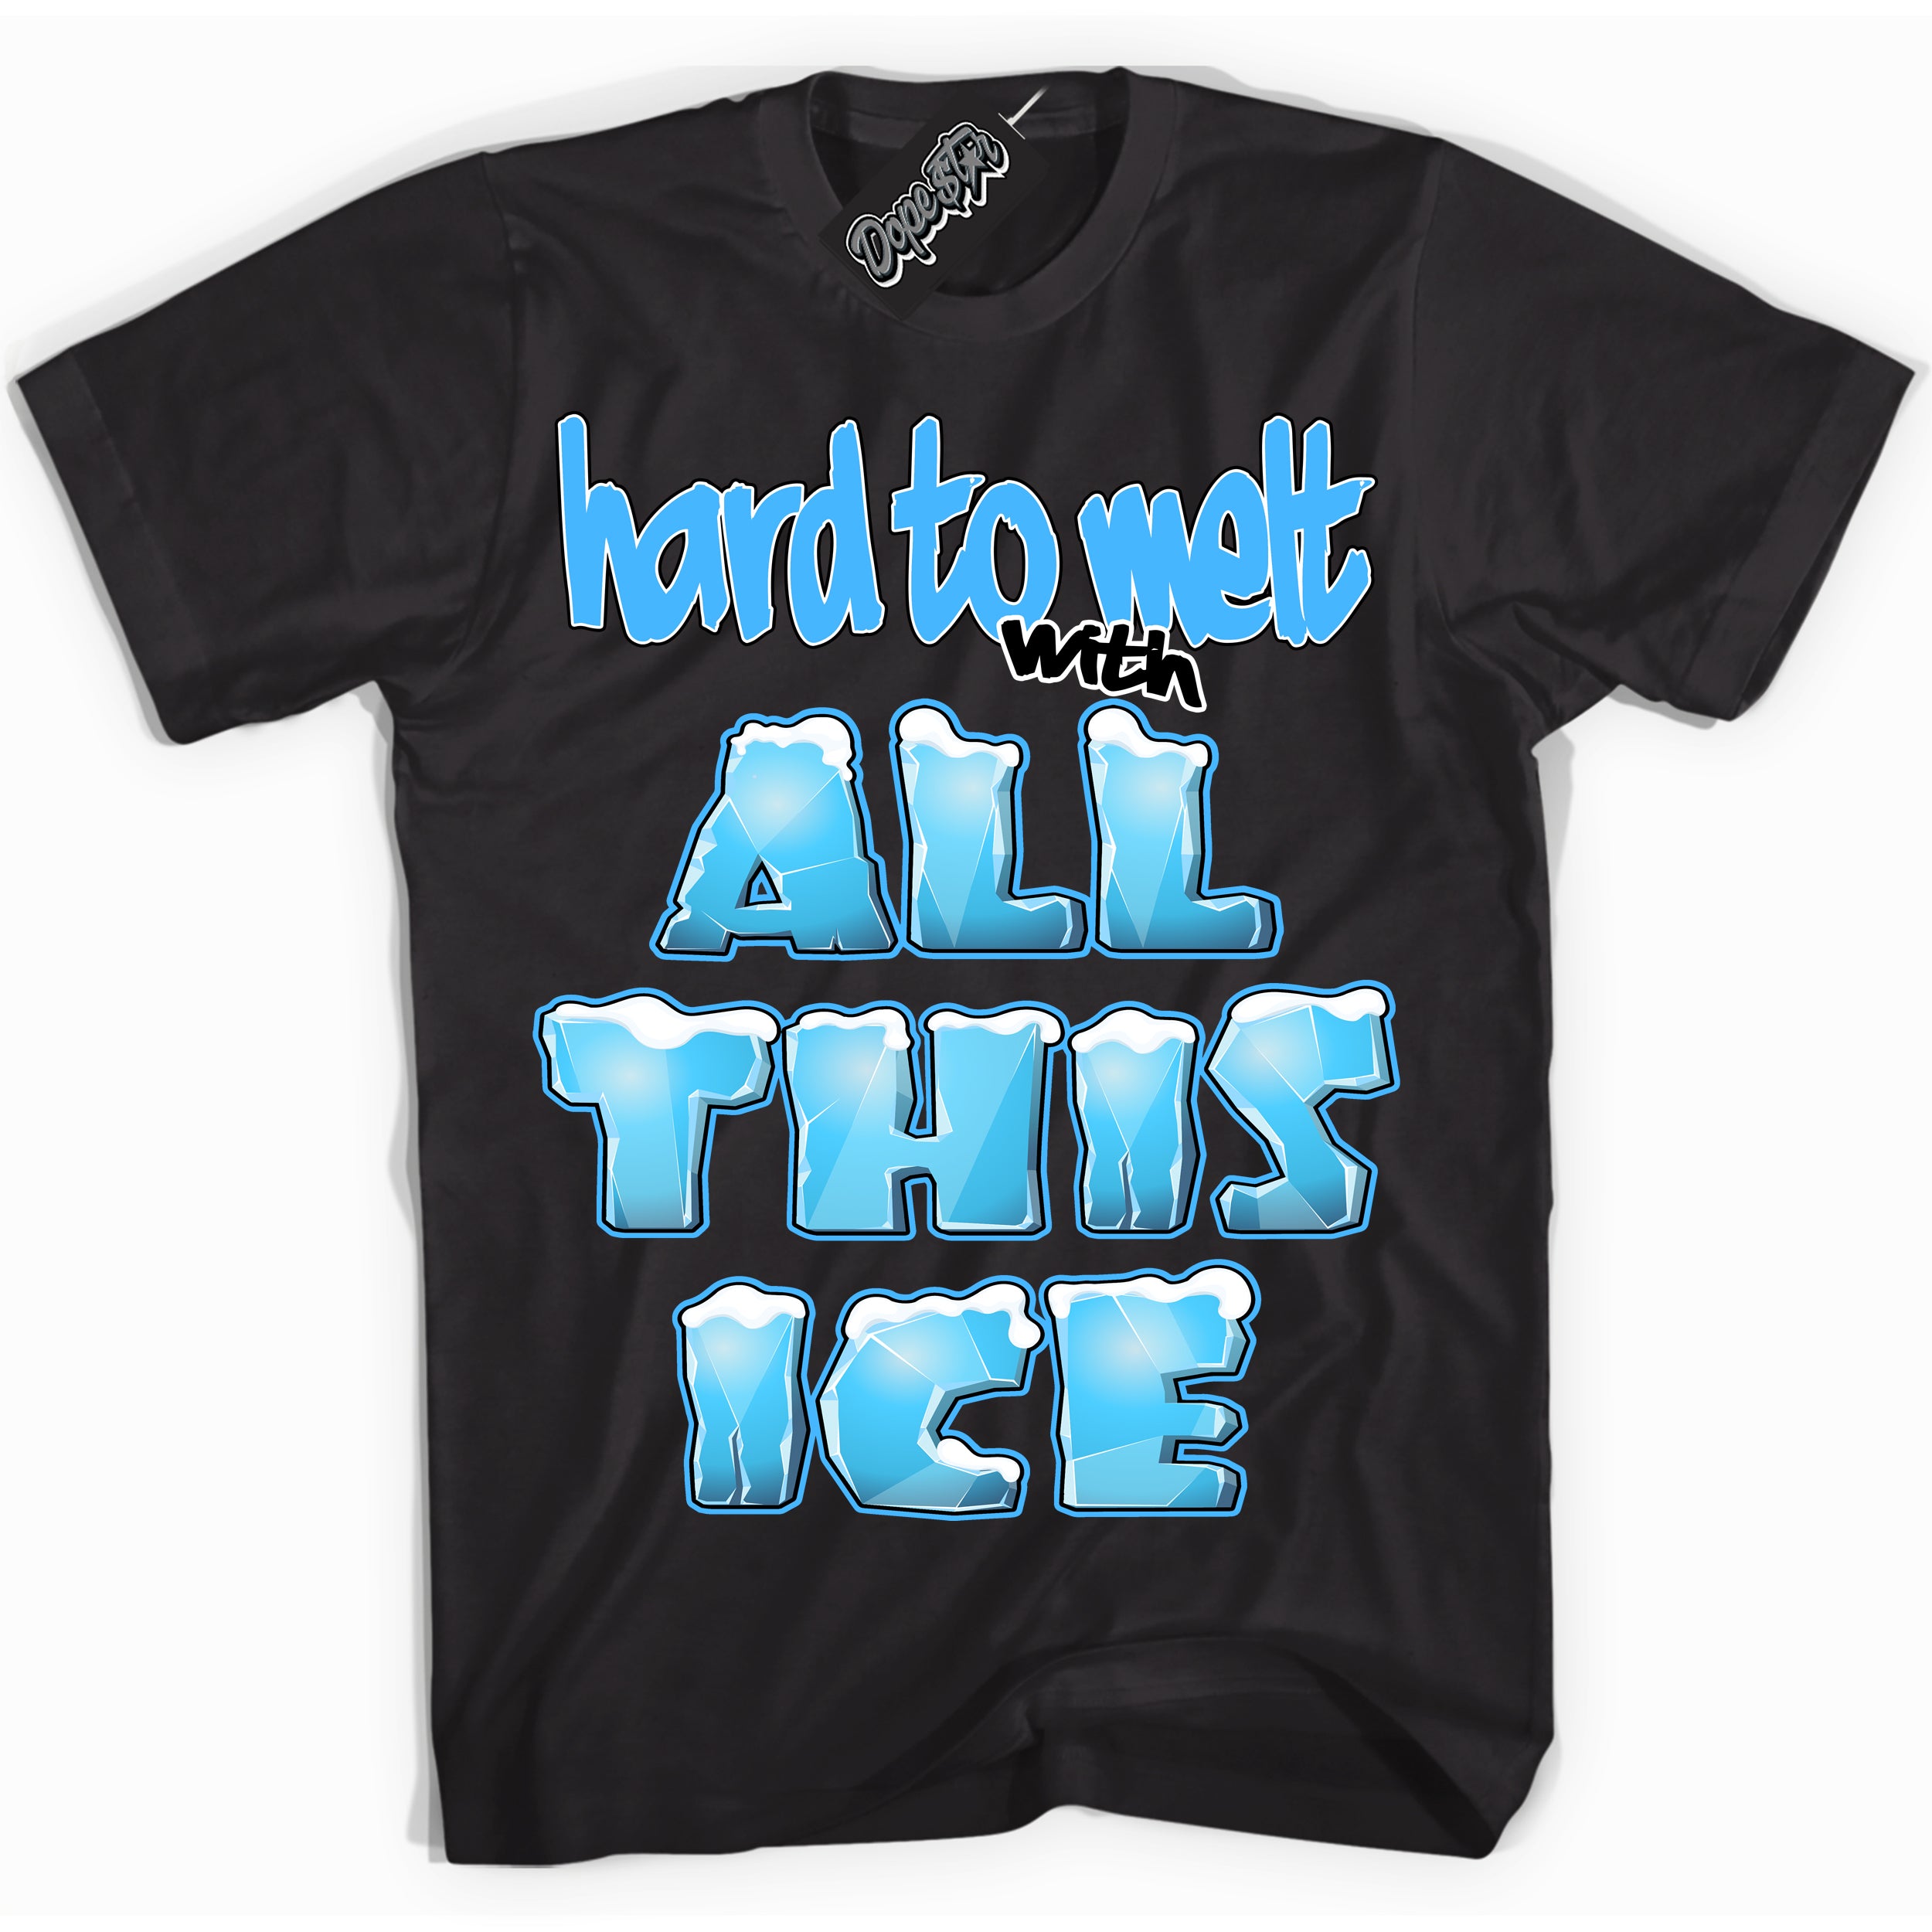 Cool Black graphic tee with “ All This Ice ” design, that perfectly matches Powder Blue 9s sneakers 